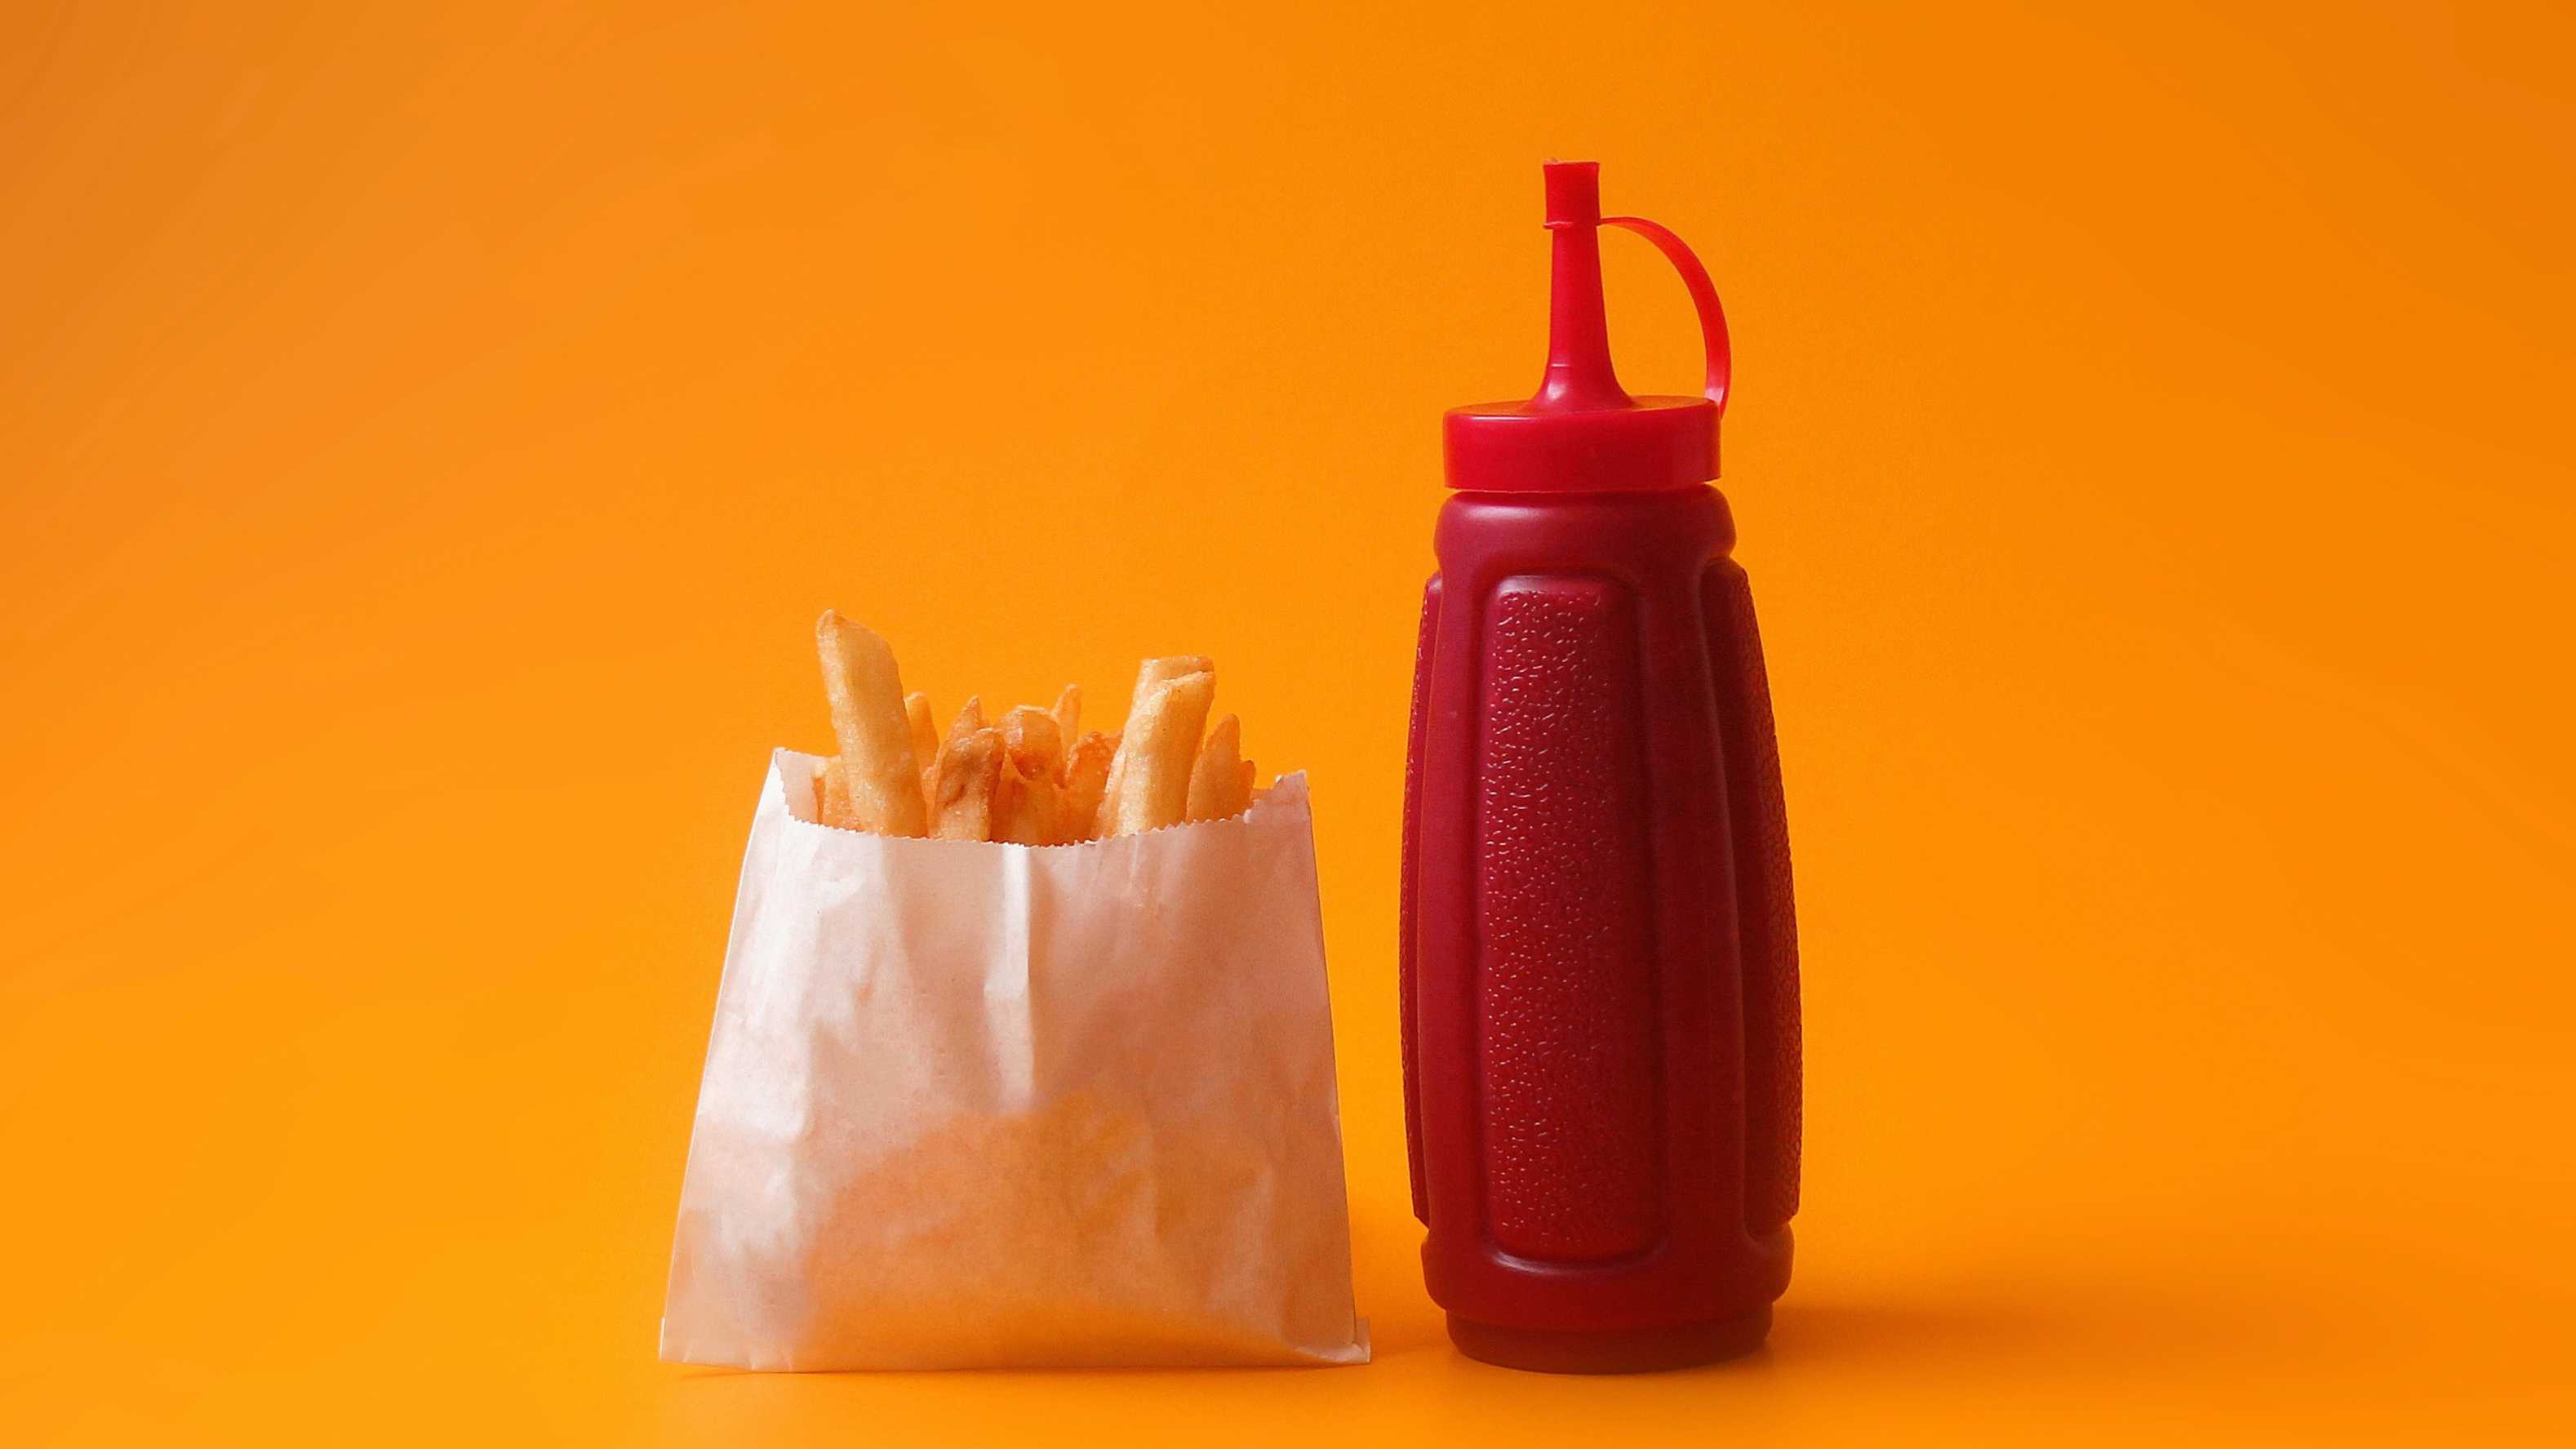 fries and ketchup are popular at this fat food franchise that uses Gigpro to cover supplemental staffing needs.